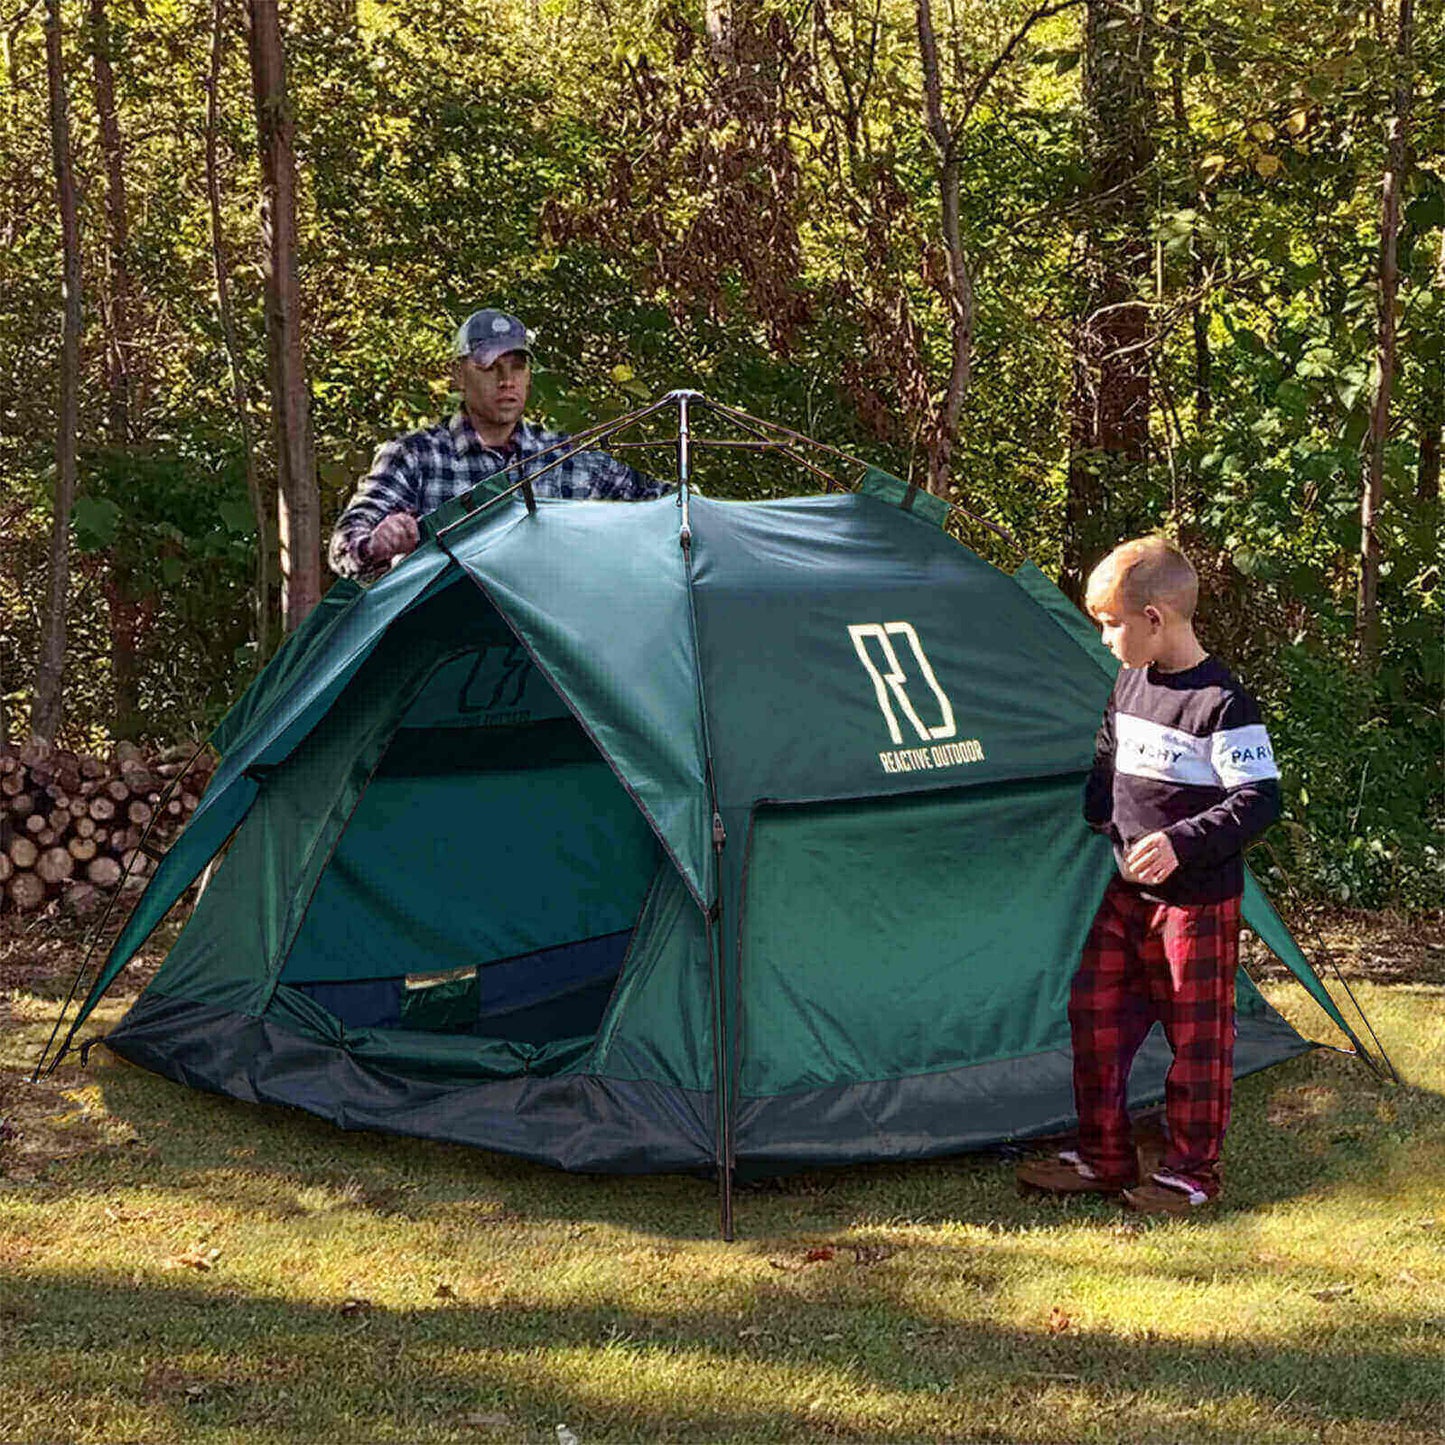 Large-Sized 3Secs Tent (For 2-3 Person, EU) + Free Camping Checklist